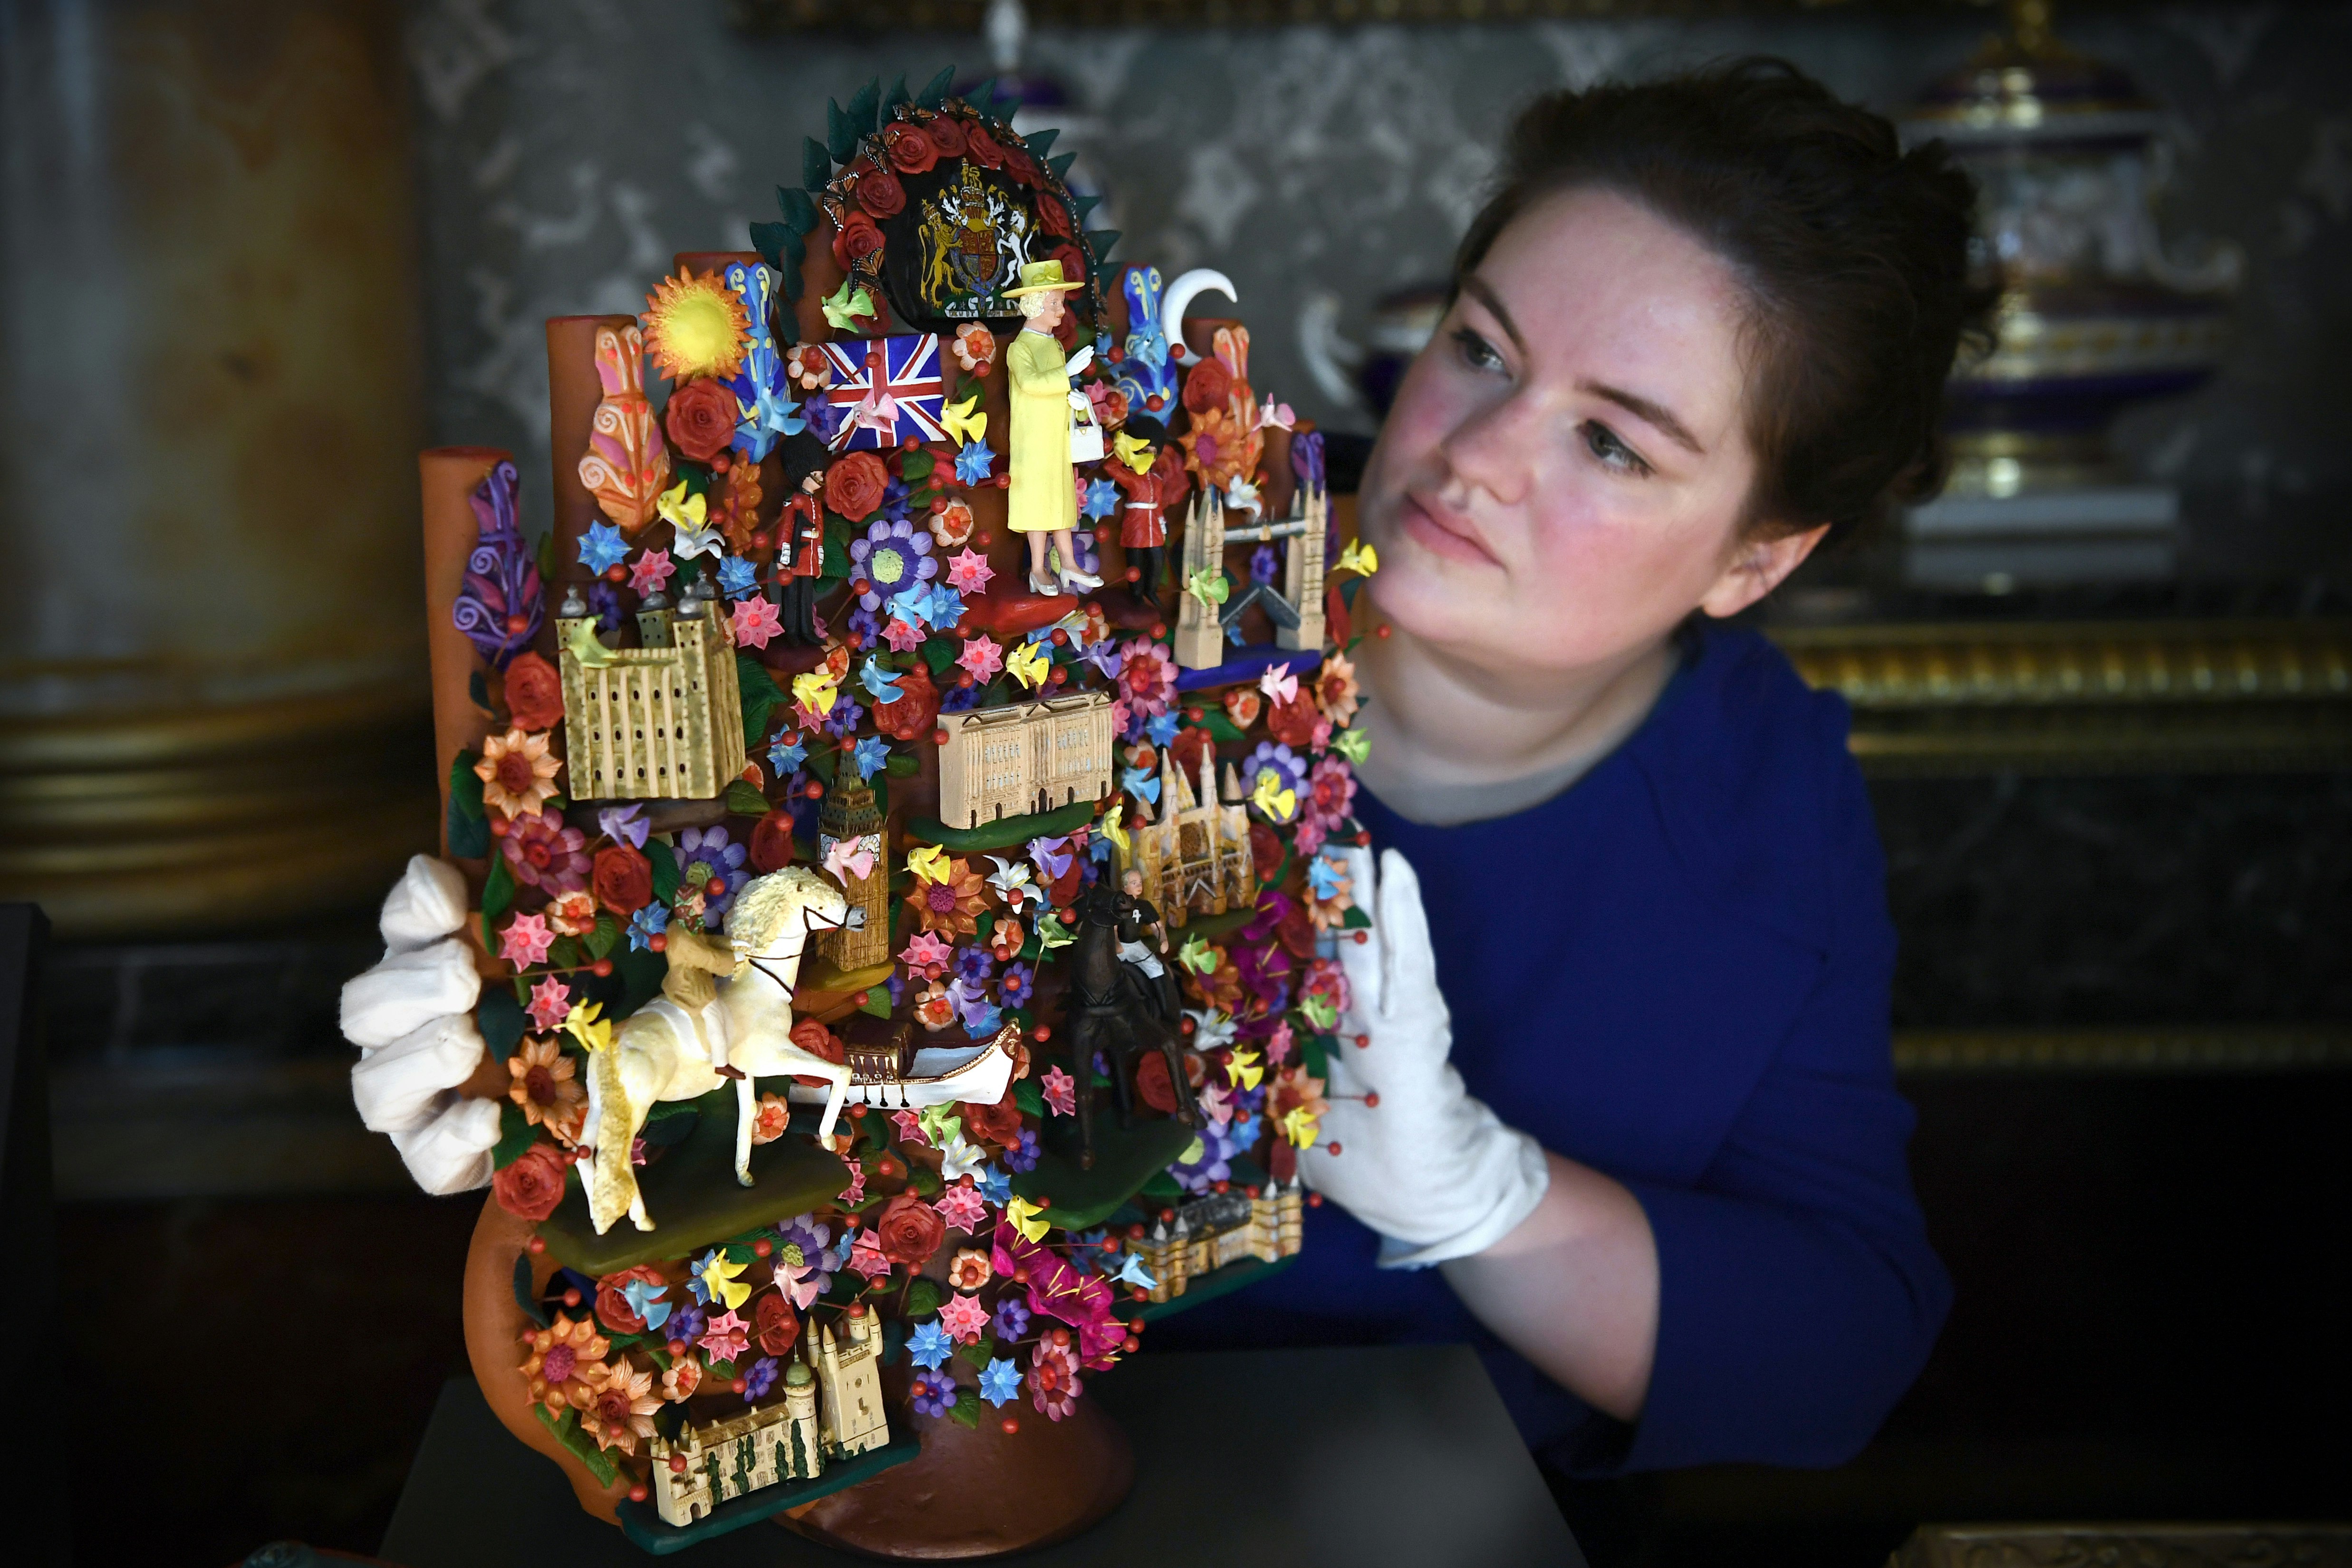 A member of staff poses with a 'Tree of Life' art piece given to Queen Elizabeth II by President Enrique Pena Nieto of Mexico during his 2015 State Visit.